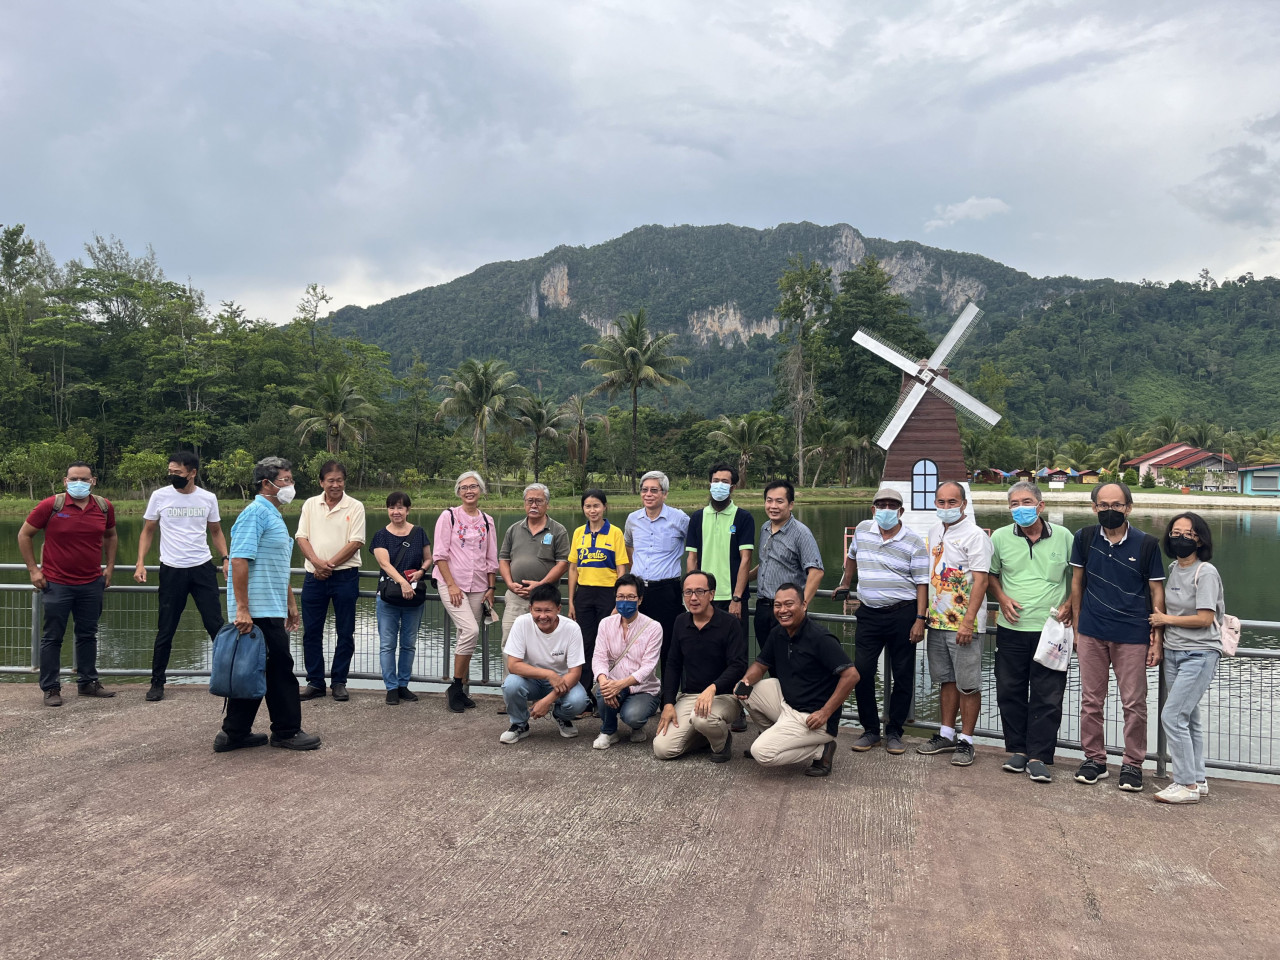 The first group of participants on the trip, involving 25 individuals consisting of tour guides, tourism industry players and travel enthusiasts, are seen here in a photo taken last month. – RACHEL YEOH/The Vibes pic, May 2, 2022